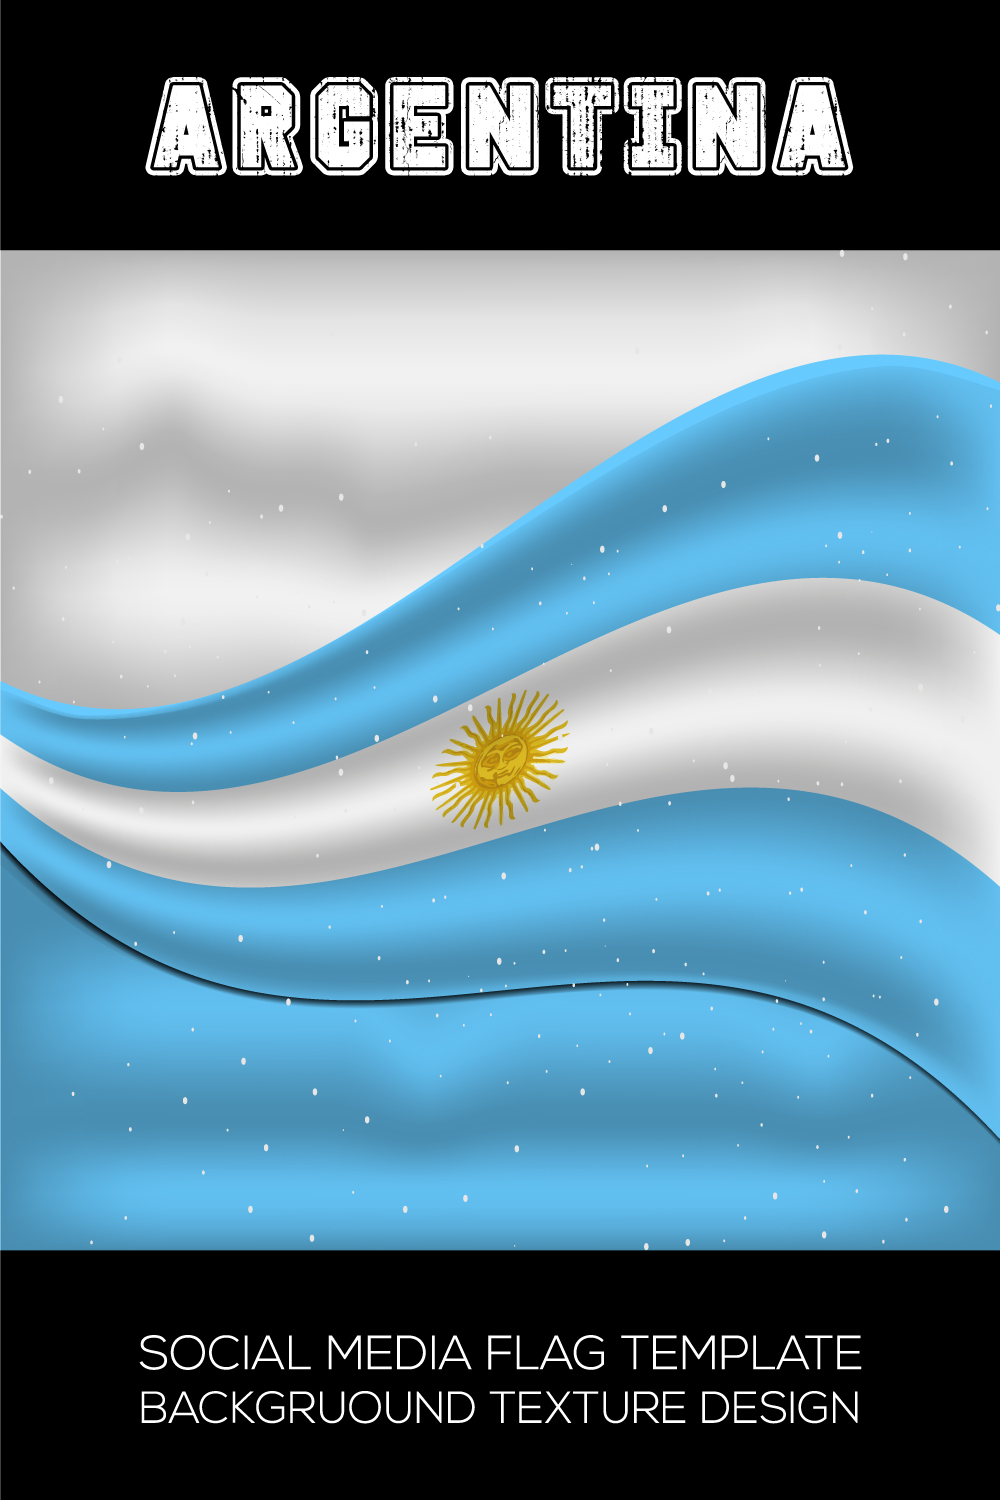 Irresistible image of the flag of Argentina.